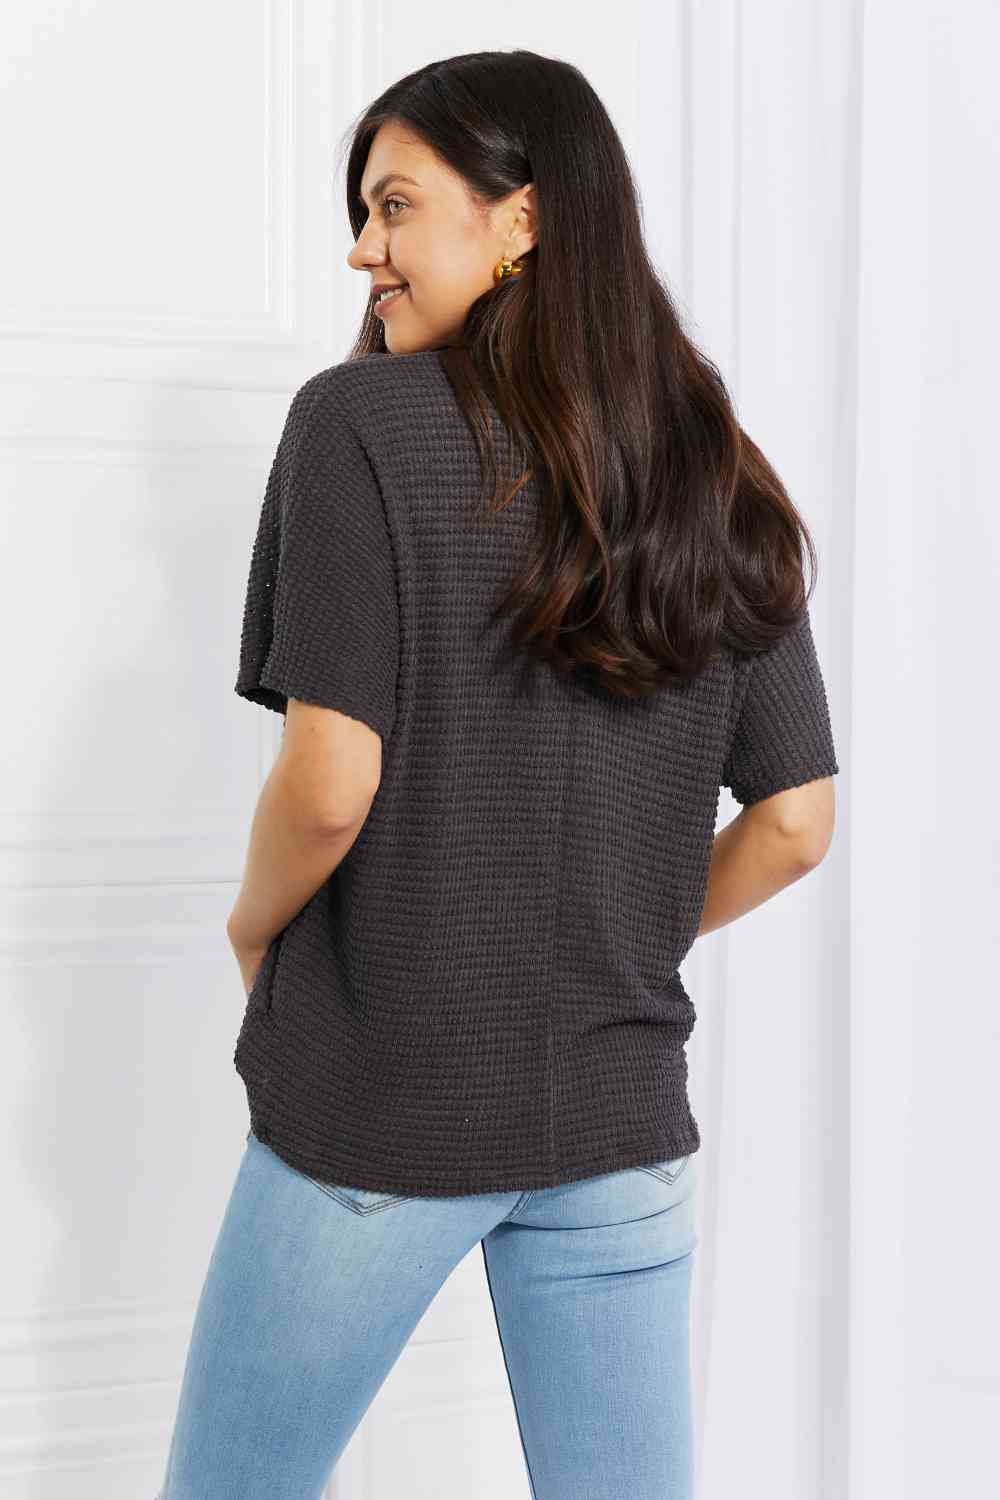 Zenana Full Size Spring It On Keyhole Jacquard Sweater in Gray - Cheeky Chic Boutique